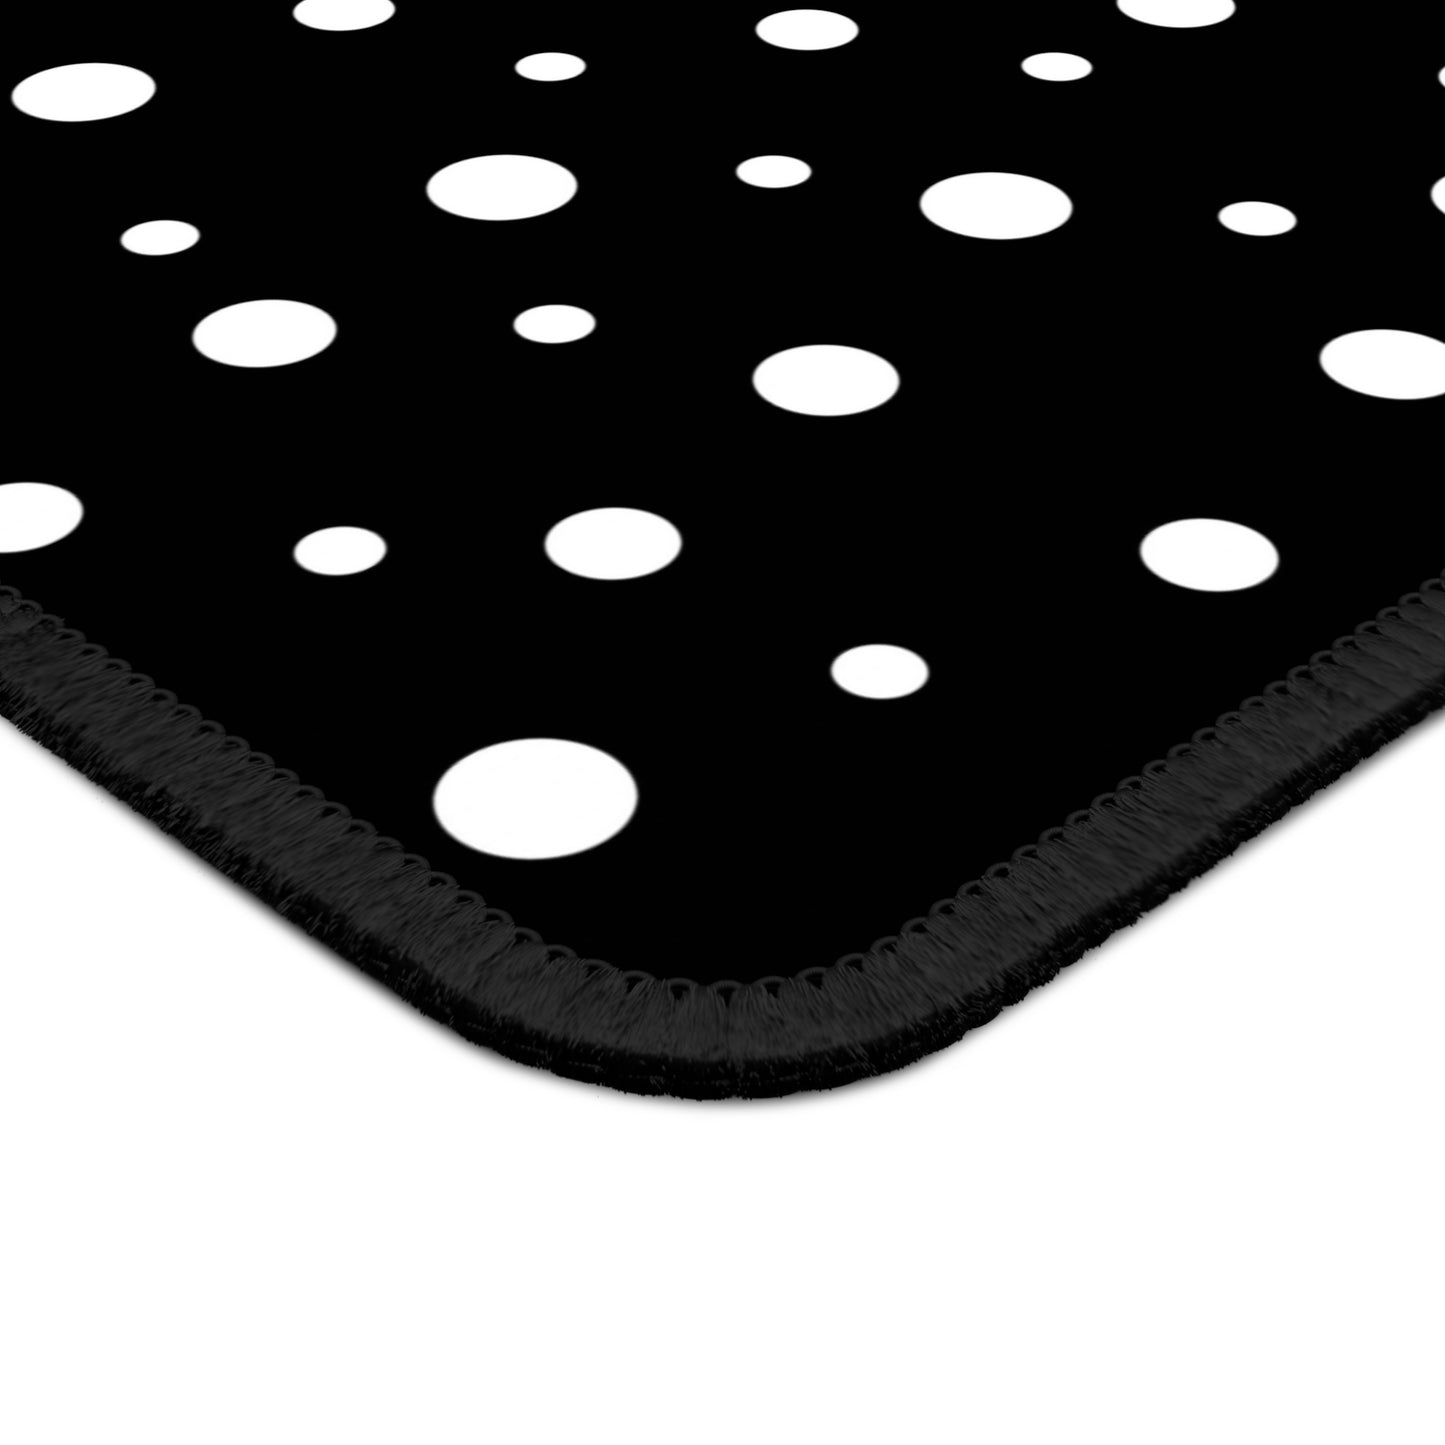 White Dots & Black Gaming Mouse Pad - Desk Cookies